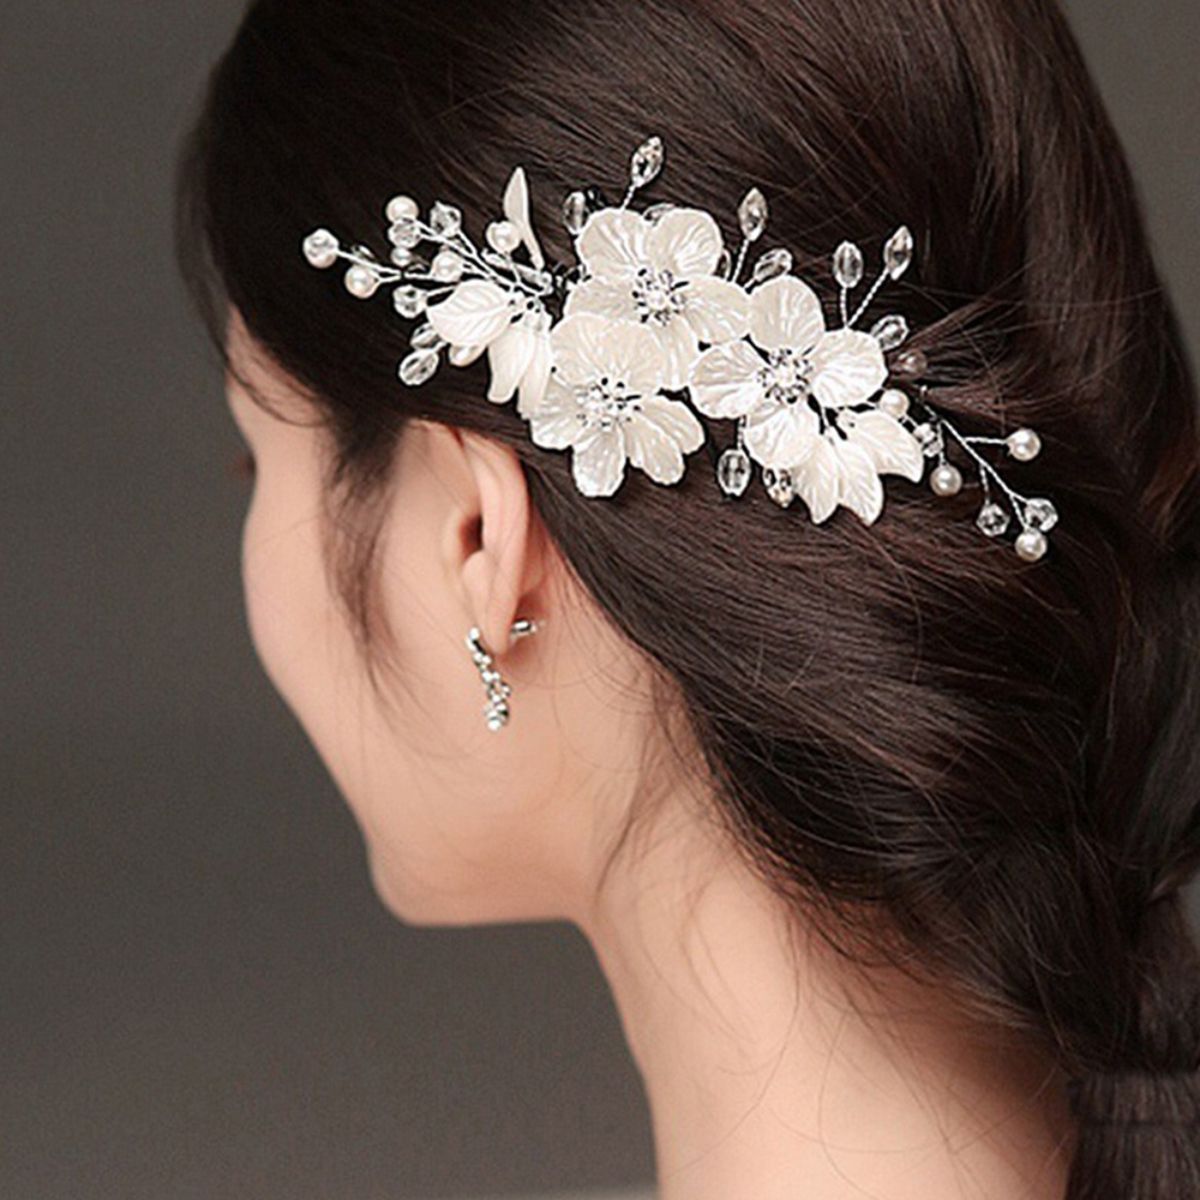 Trending Bridal Hairdos With Pearl Hair Accessories to add charm!